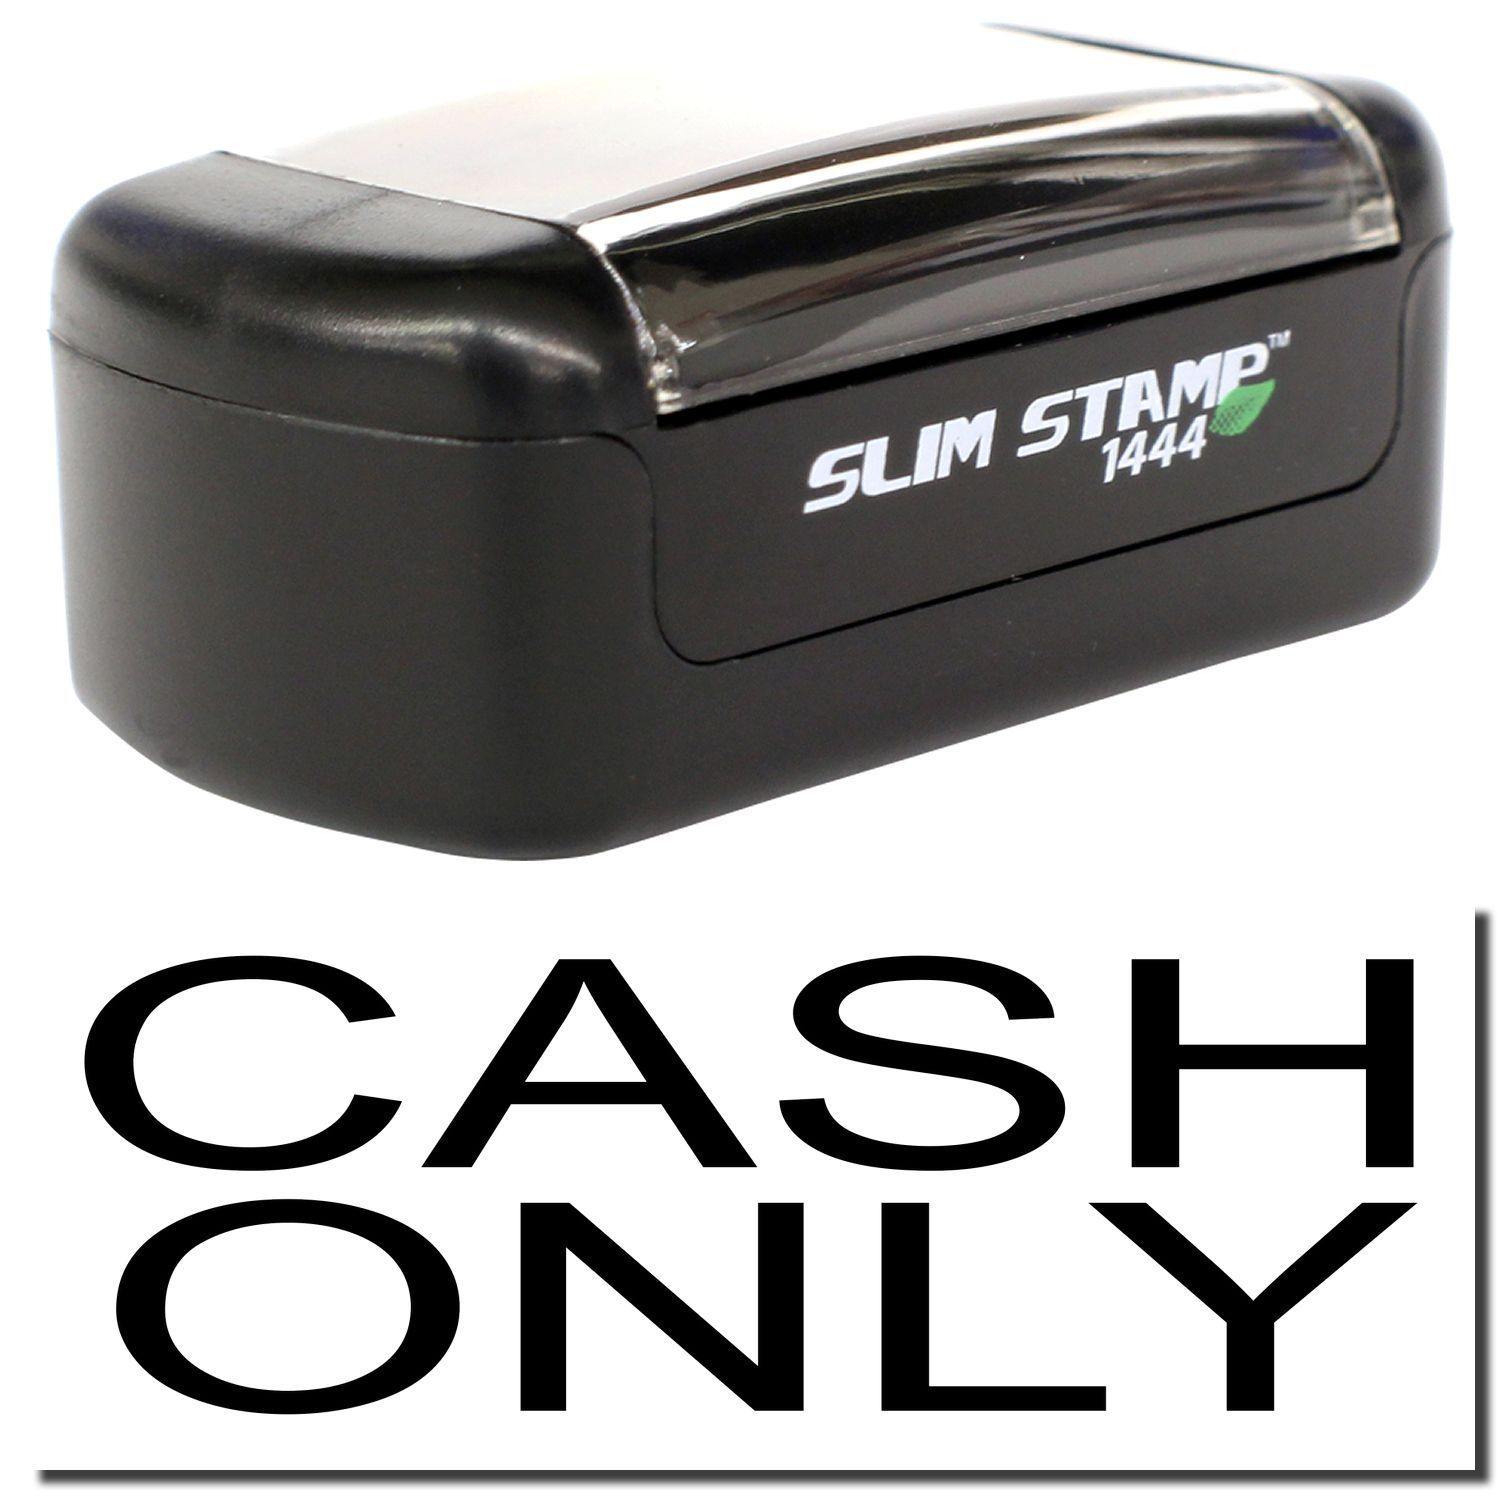 A stock office pre-inked stamp with a stamped image showing how the text "CASH ONLY" is displayed after stamping.